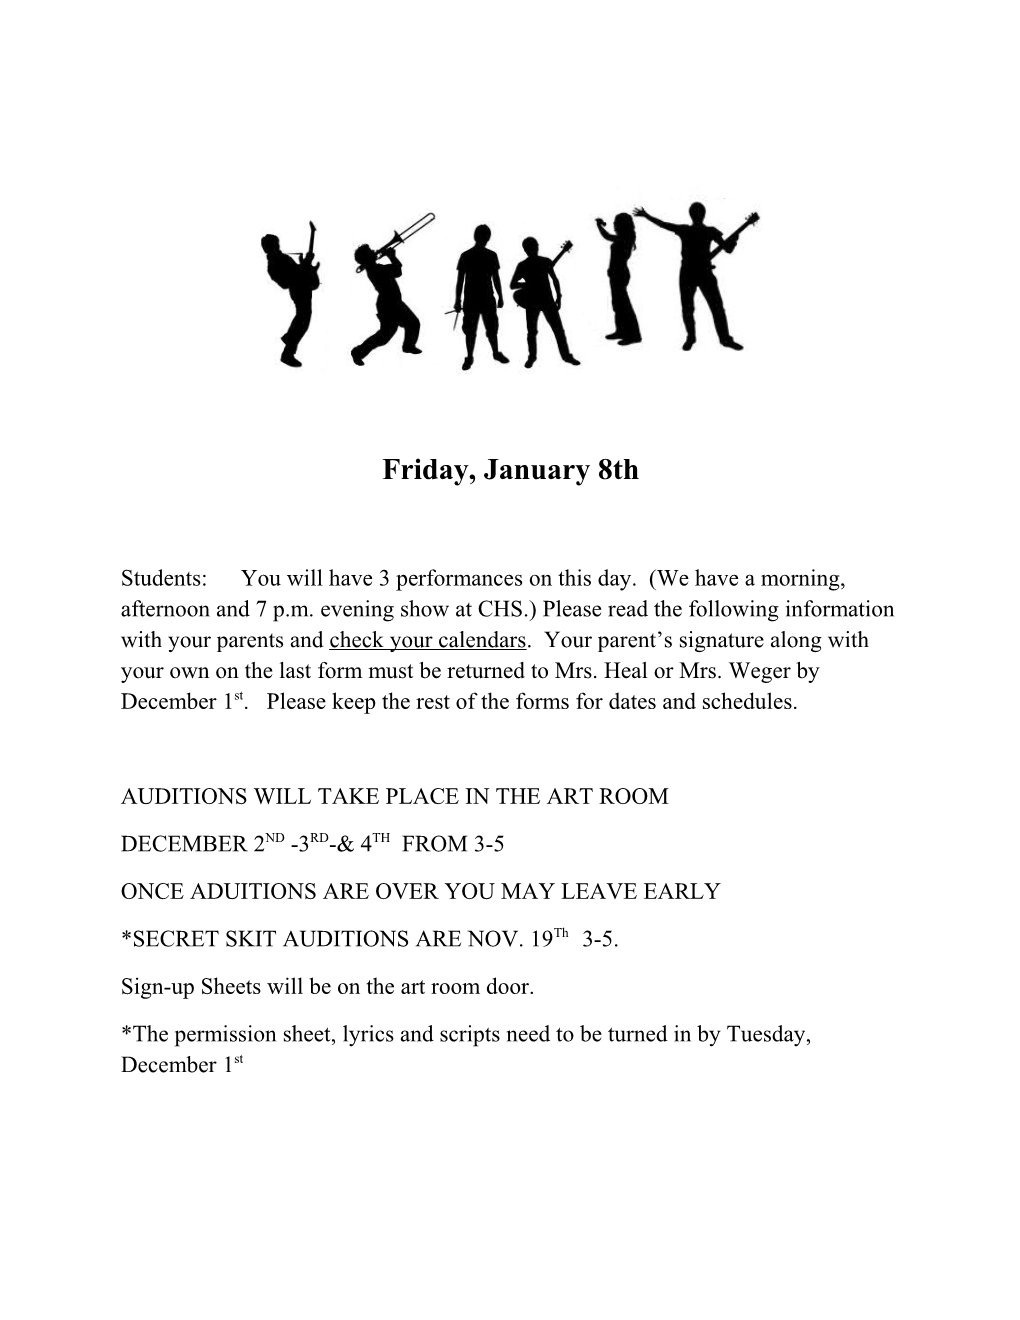 Auditions Will Take Place in the Art Room